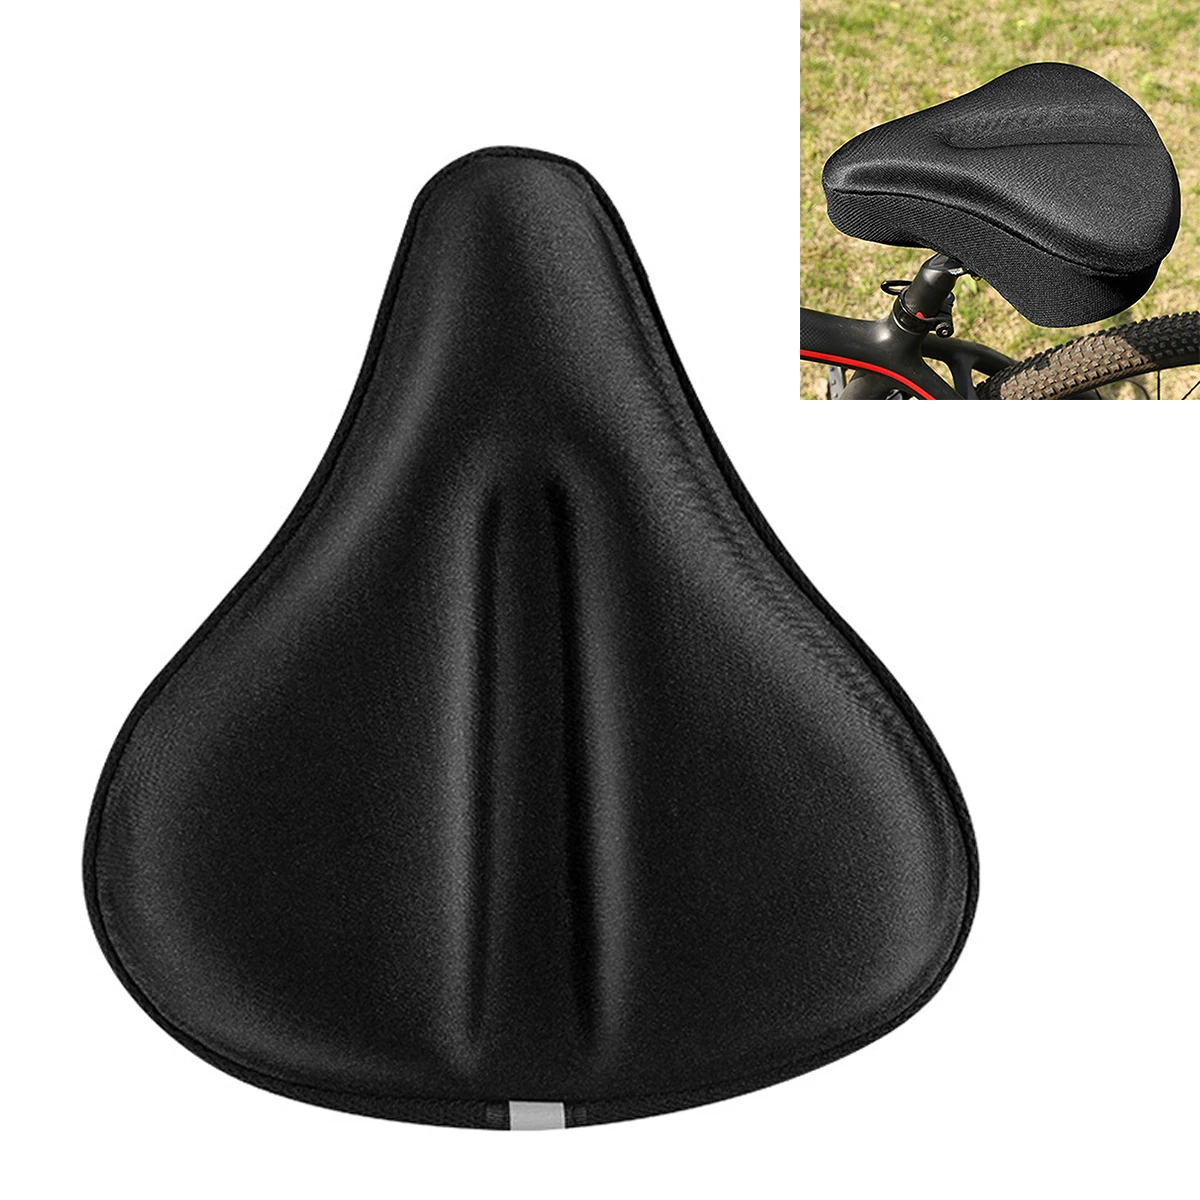 

Bike Seat Cover Padded Soft Thickened Bicycle Seat Thickened And Widened Silica Gel Breathable for Spin Indoor Outdoor Cycling